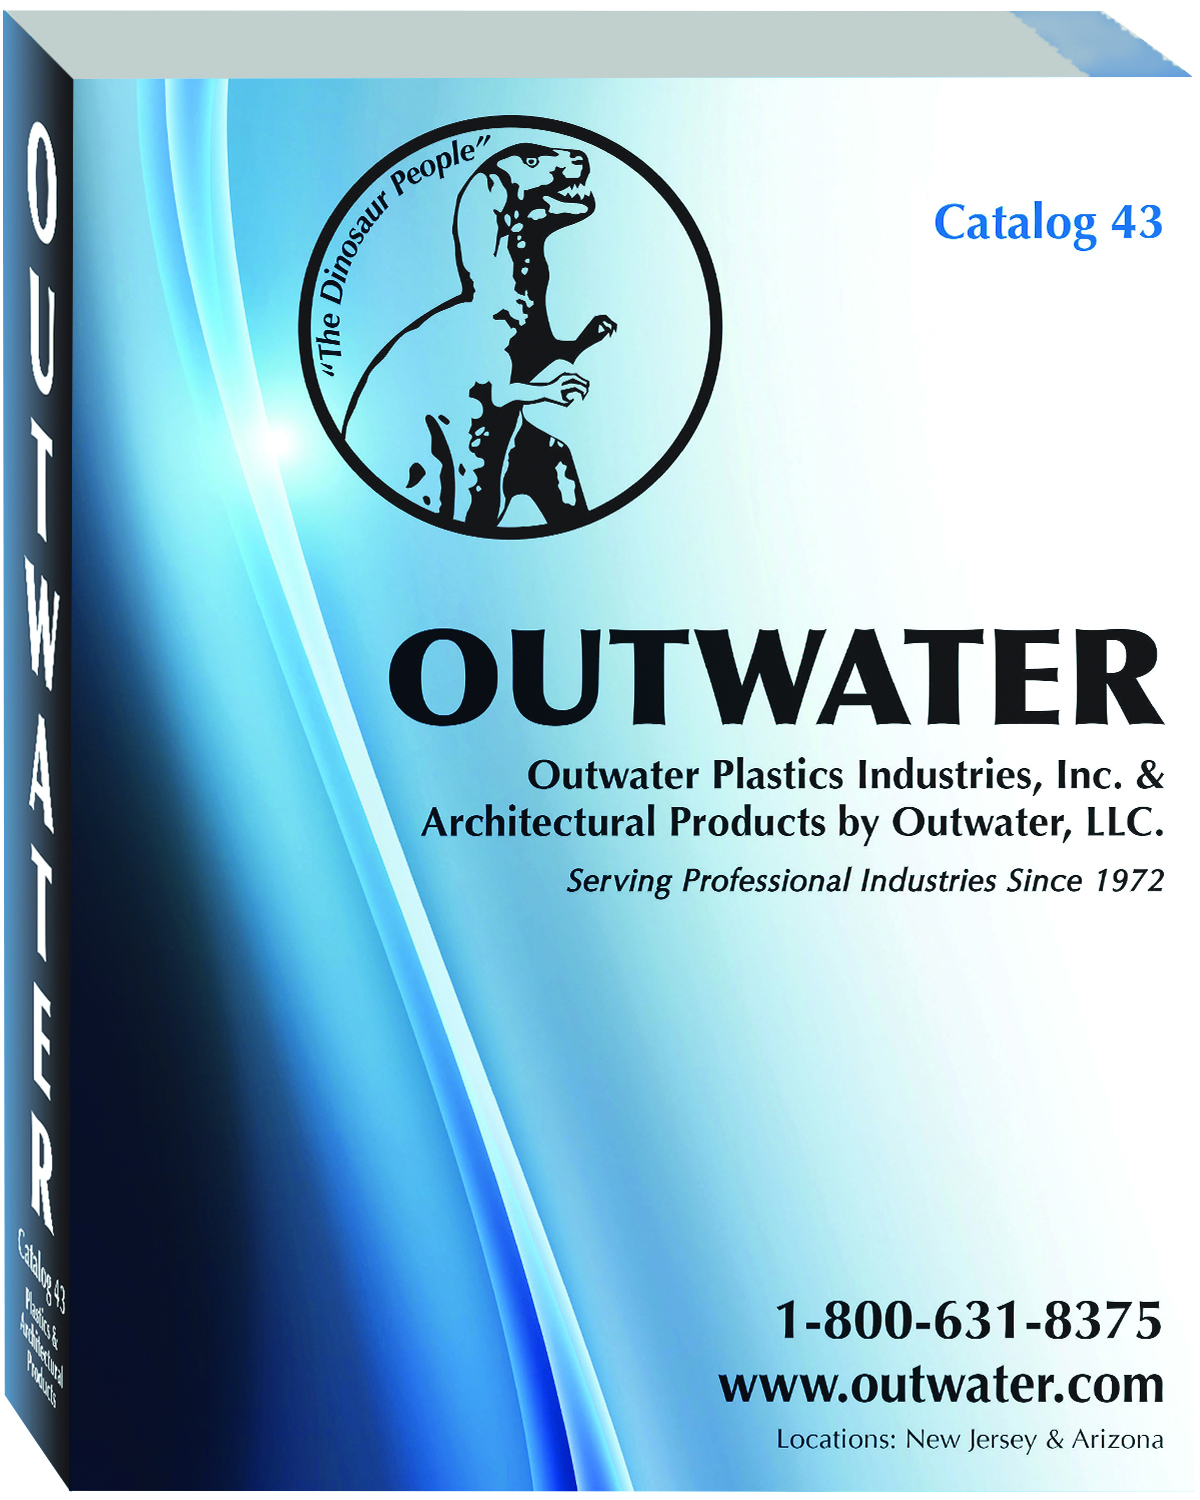 Outwater Offers More than 65,000 Traditional and Innovative Products